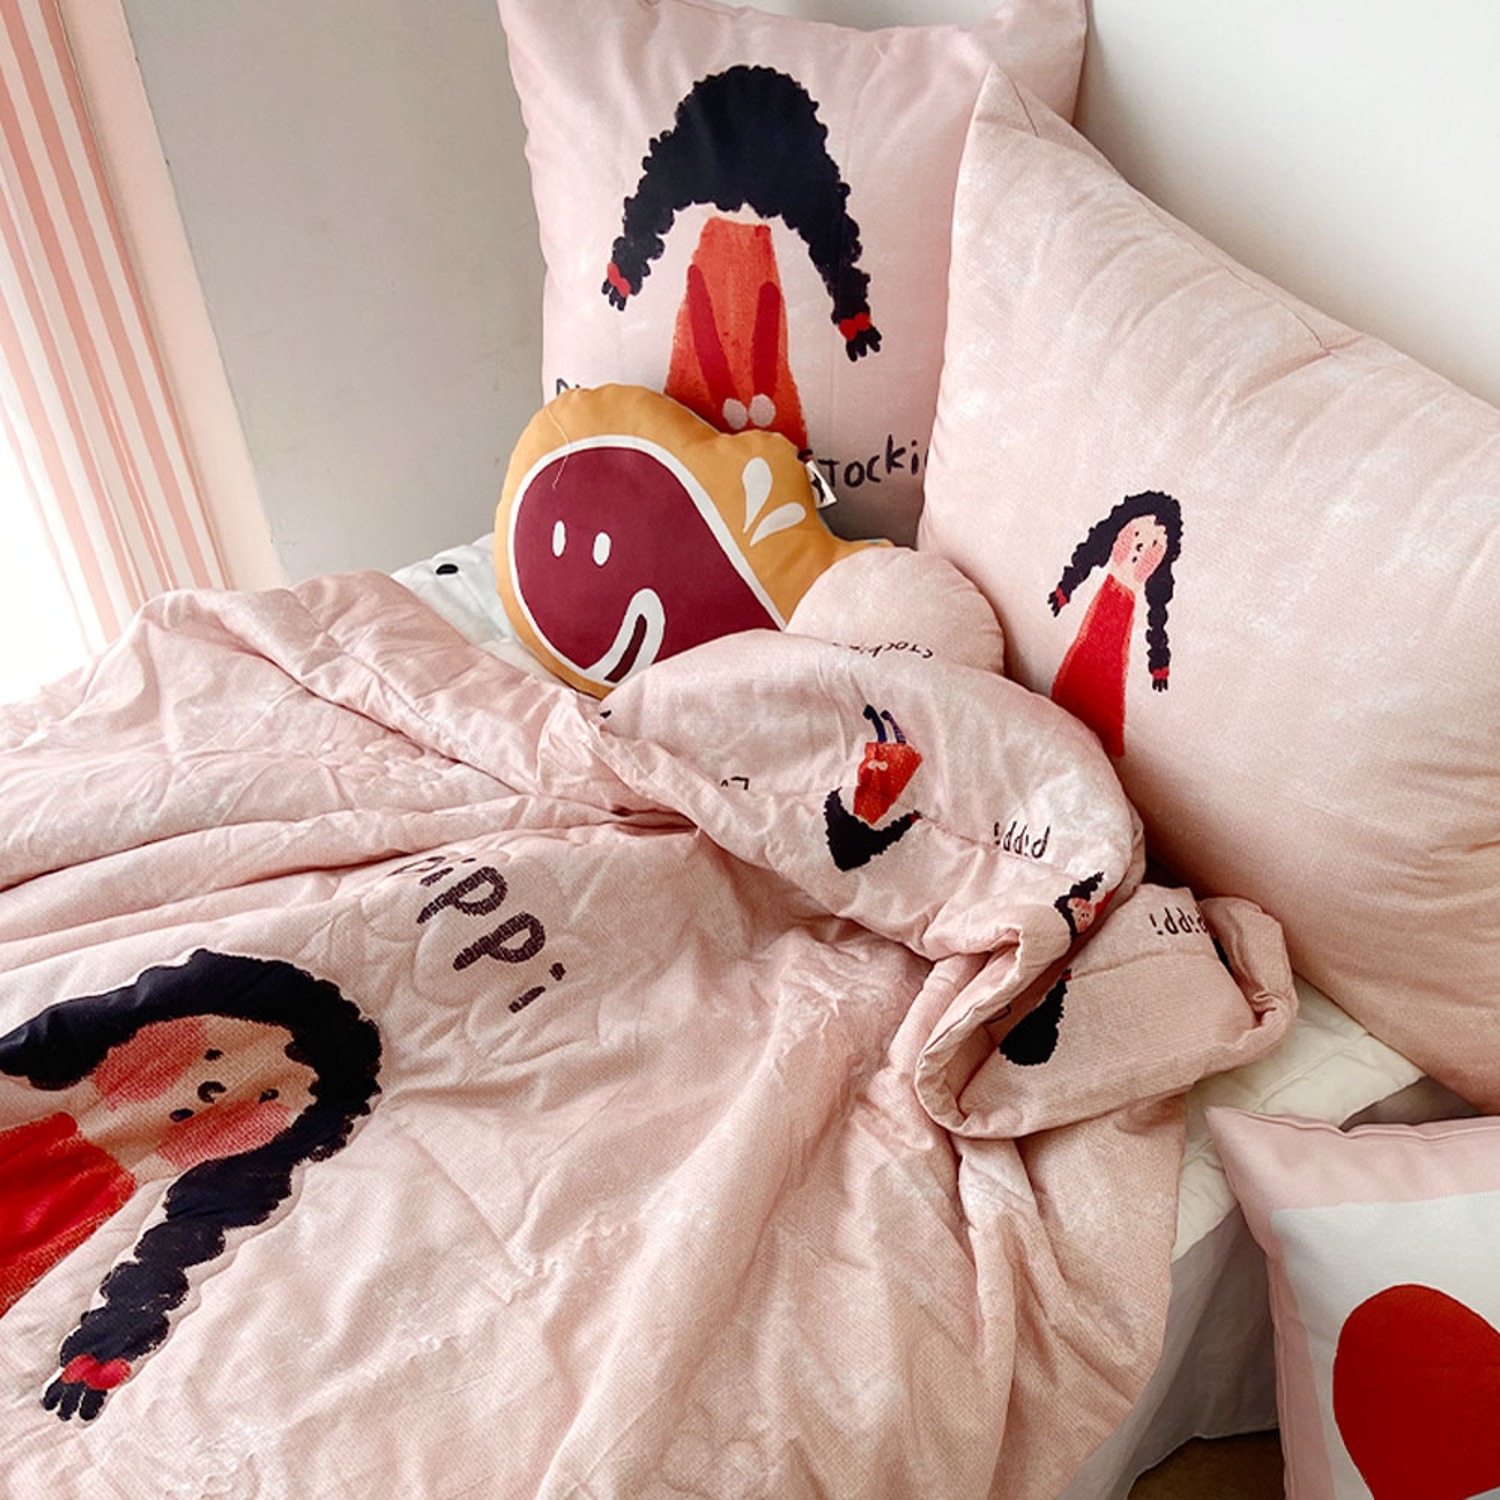 [drawing AMY]  Pippi Long Stocking summer bed comforter set